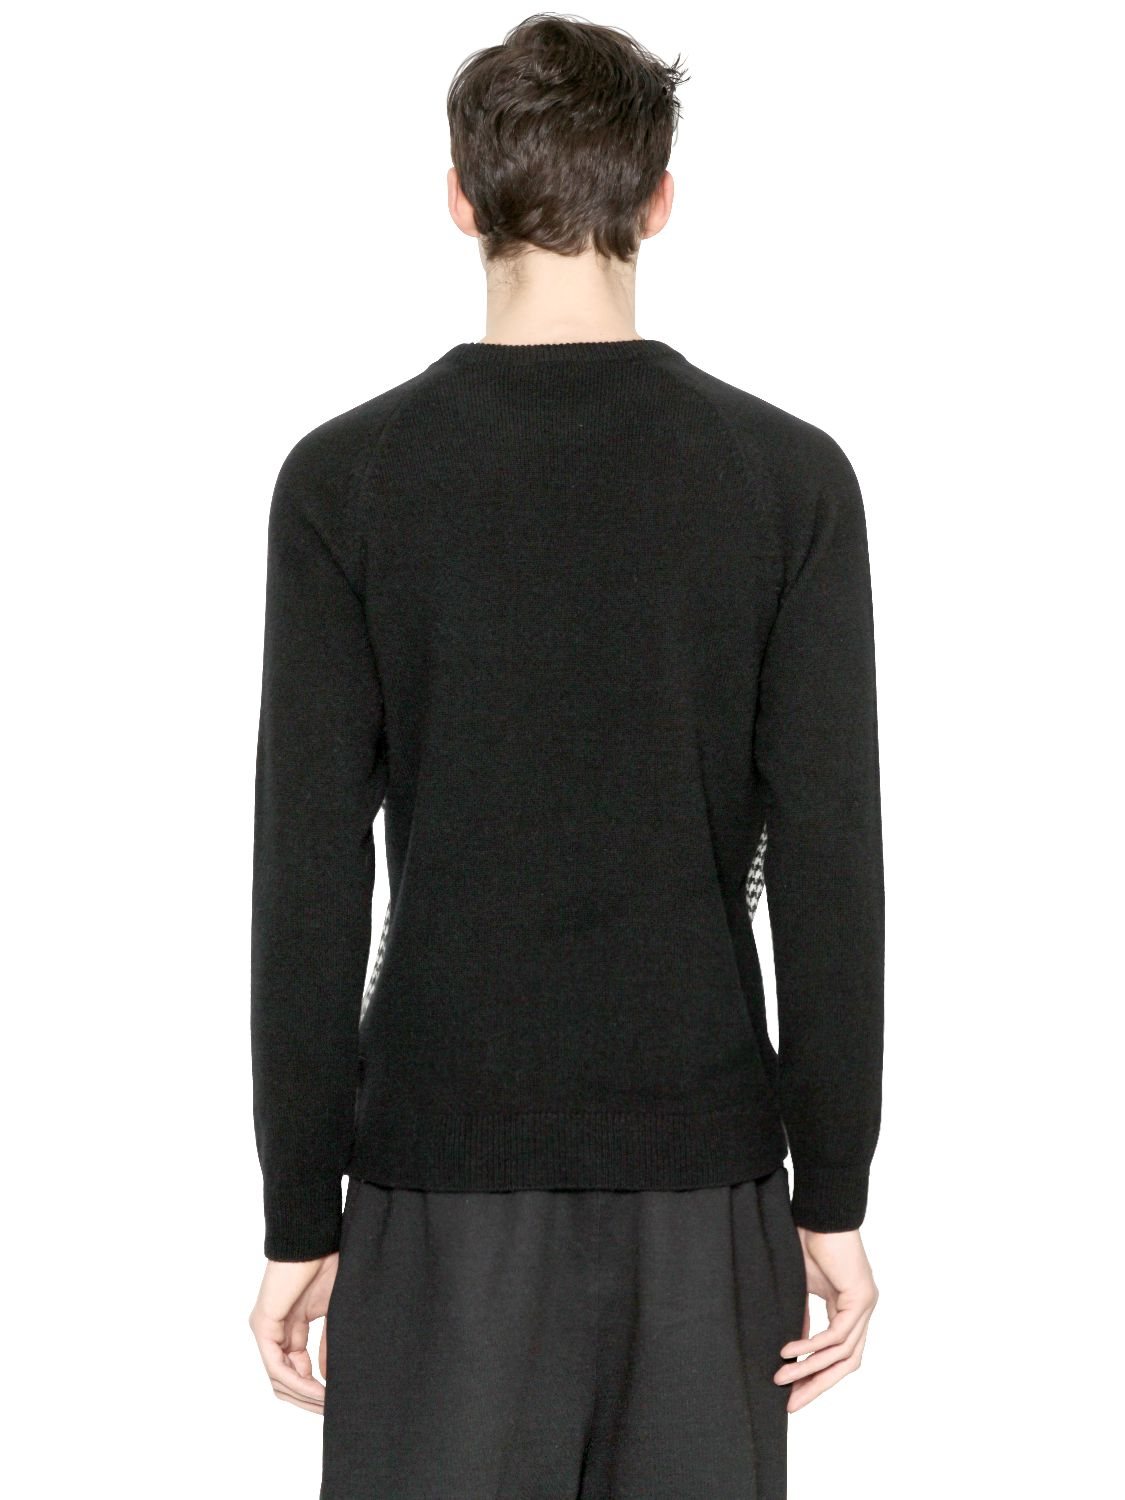 Lyst - Ami Houndstooth Panel Wool Sweater in Black for Men